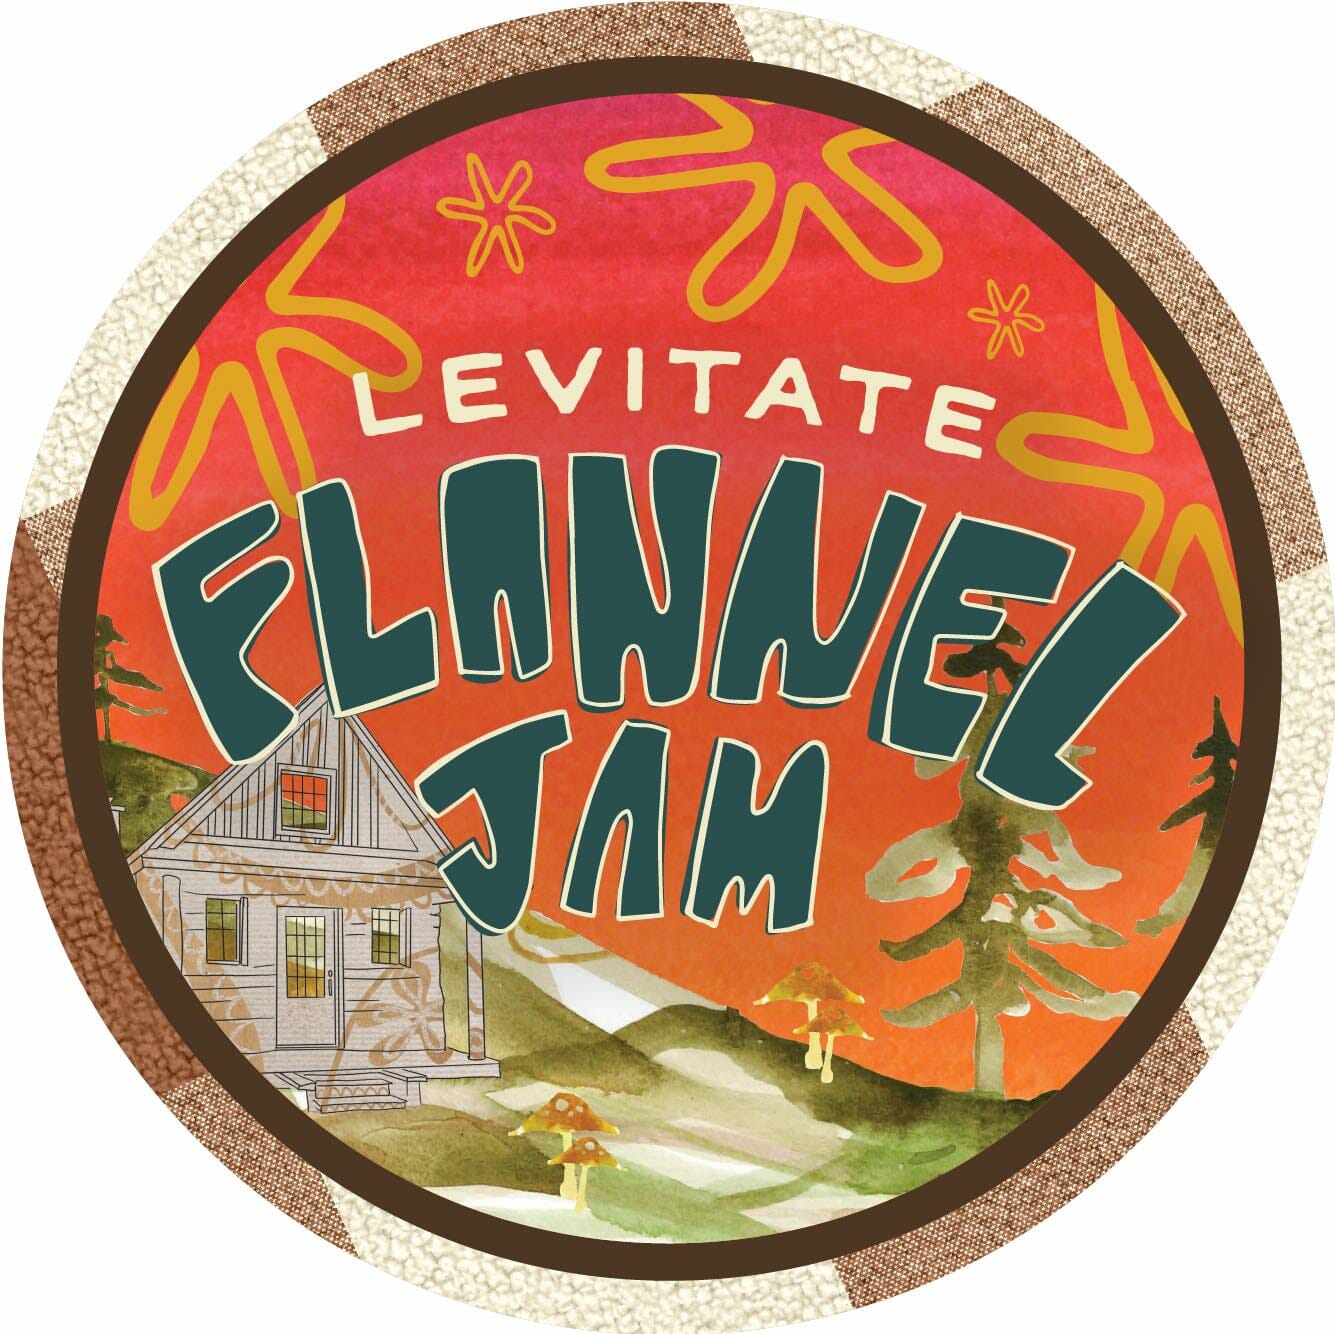 Levitate Flannel Jam Outlines Artist Lineups for Marshfield and Nantucket Events